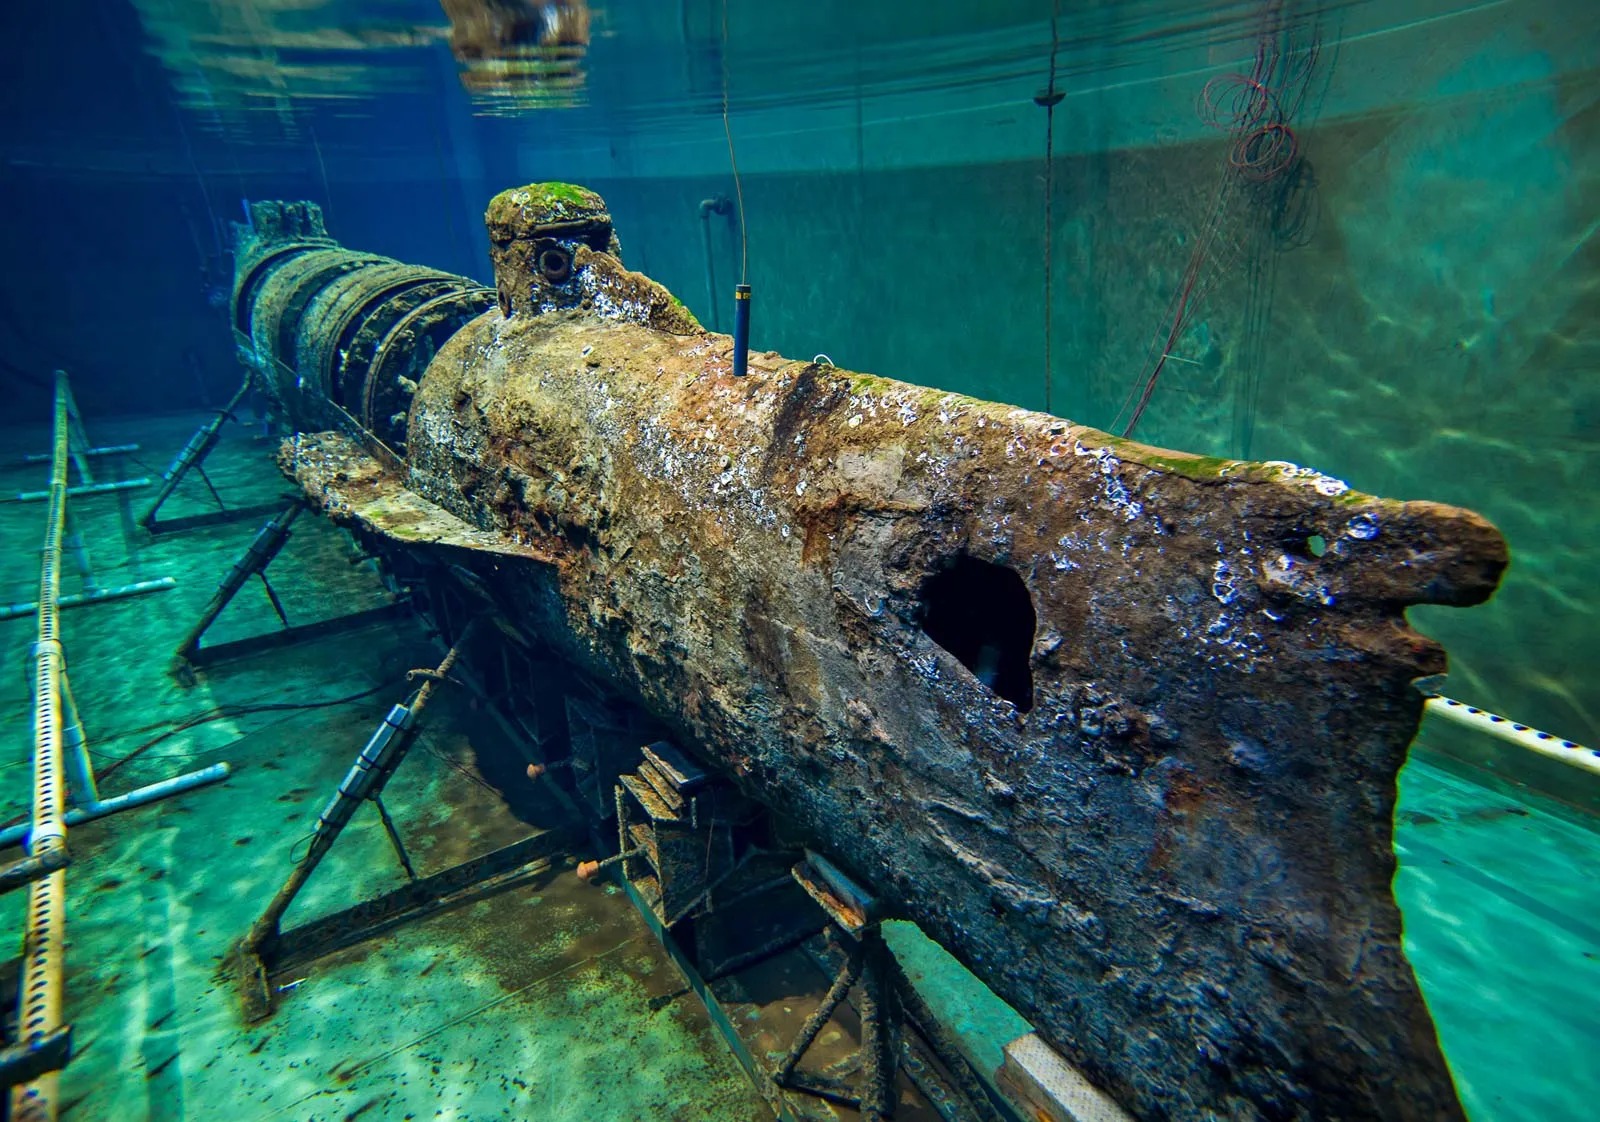 During the American Civil War, the Confederacy attempted to develop an unusual weapon known as the "H.L. Hunley," which became the first combat submarine to sink an enemy warship. On February 17, 1864, Hunley achieved this remarkable feat by torpedoing and sinking the Union Navy's Housatonic